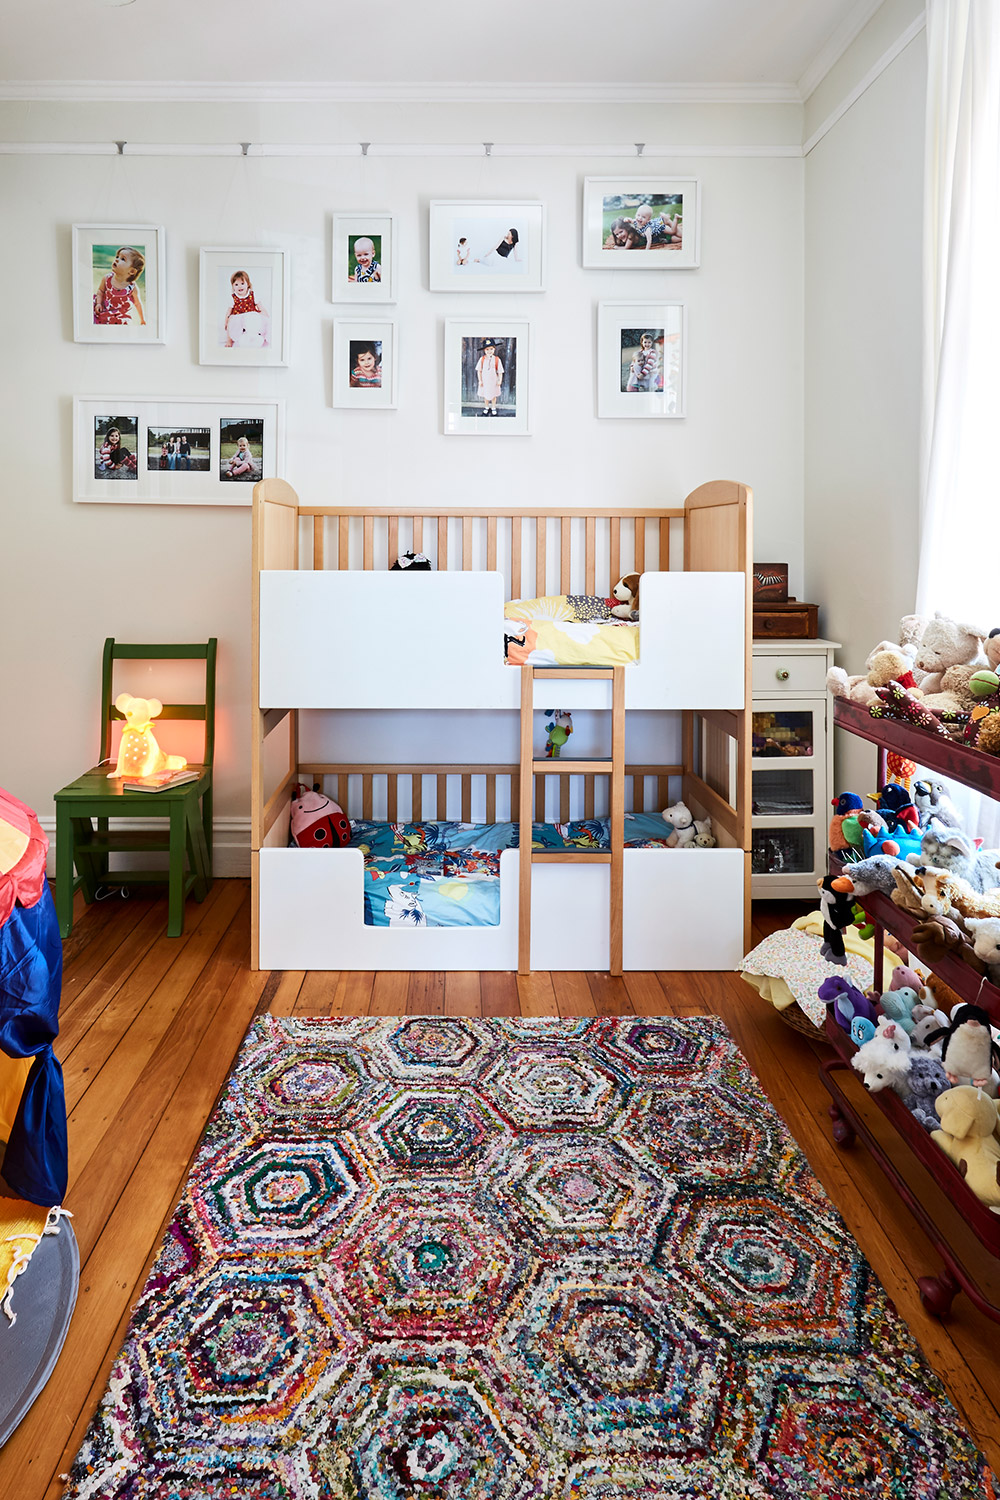 Children's bedroom and playroom